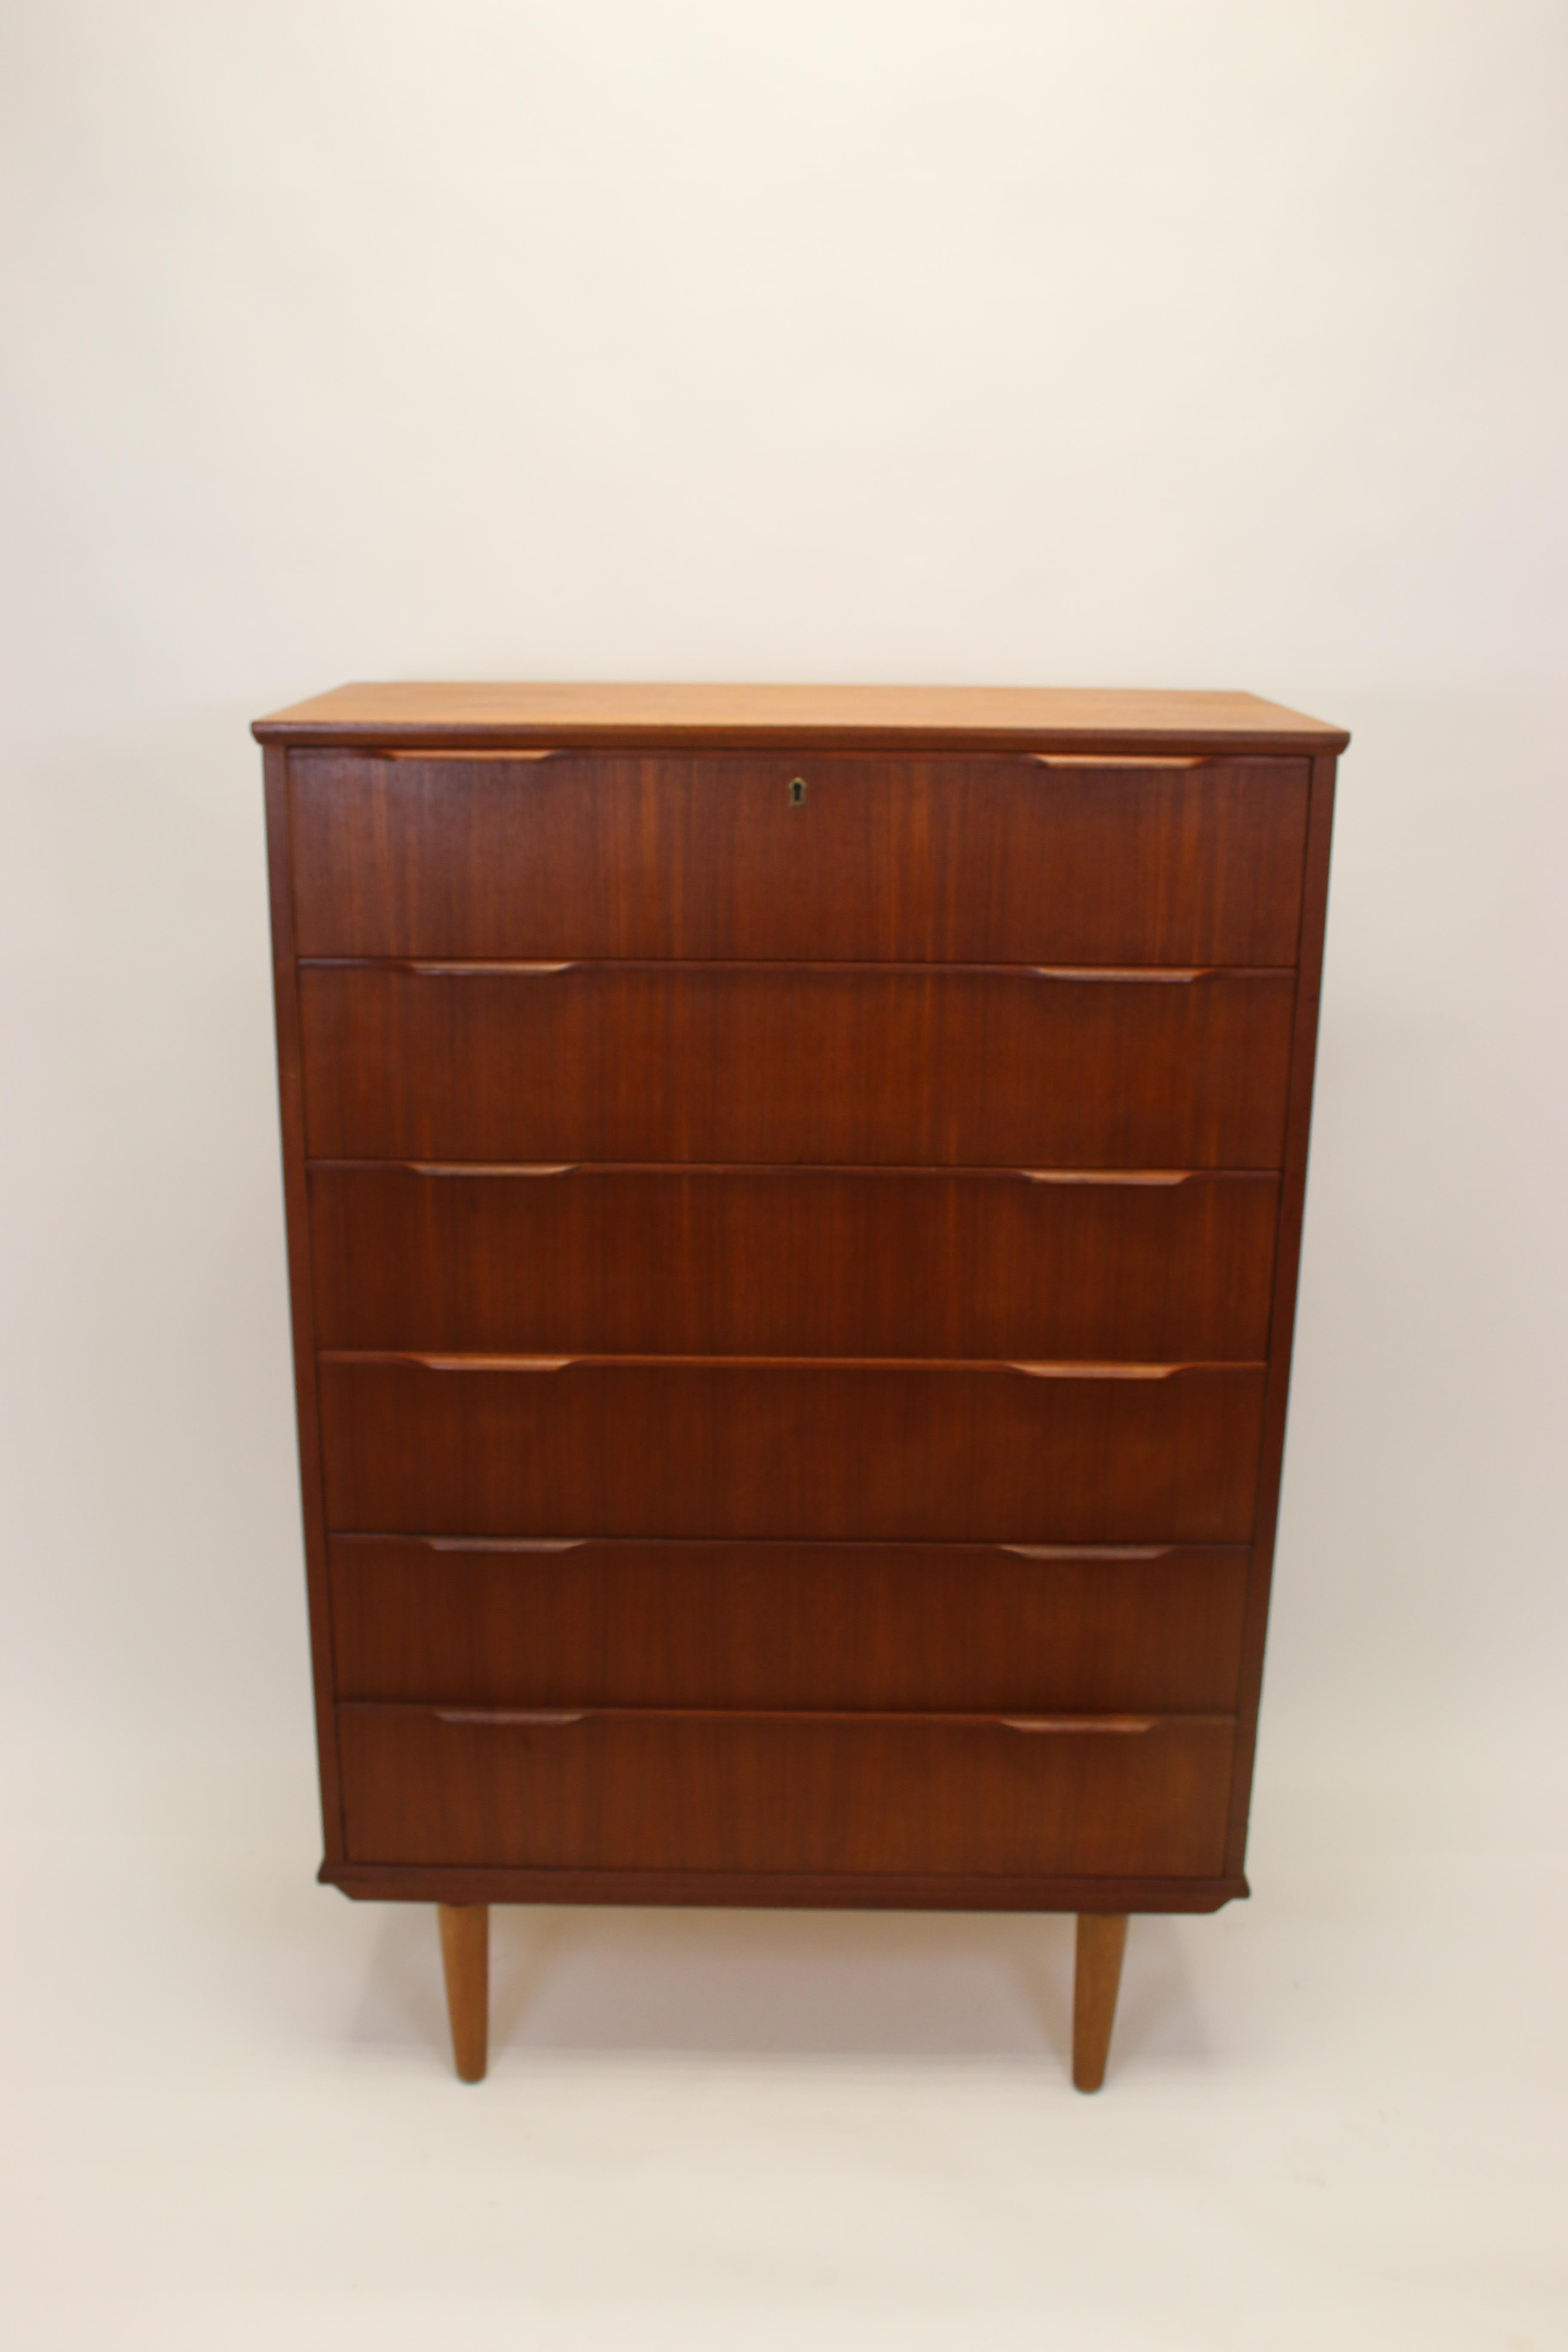 Danish Teak Chest of Drawers with 6 Drawers 1